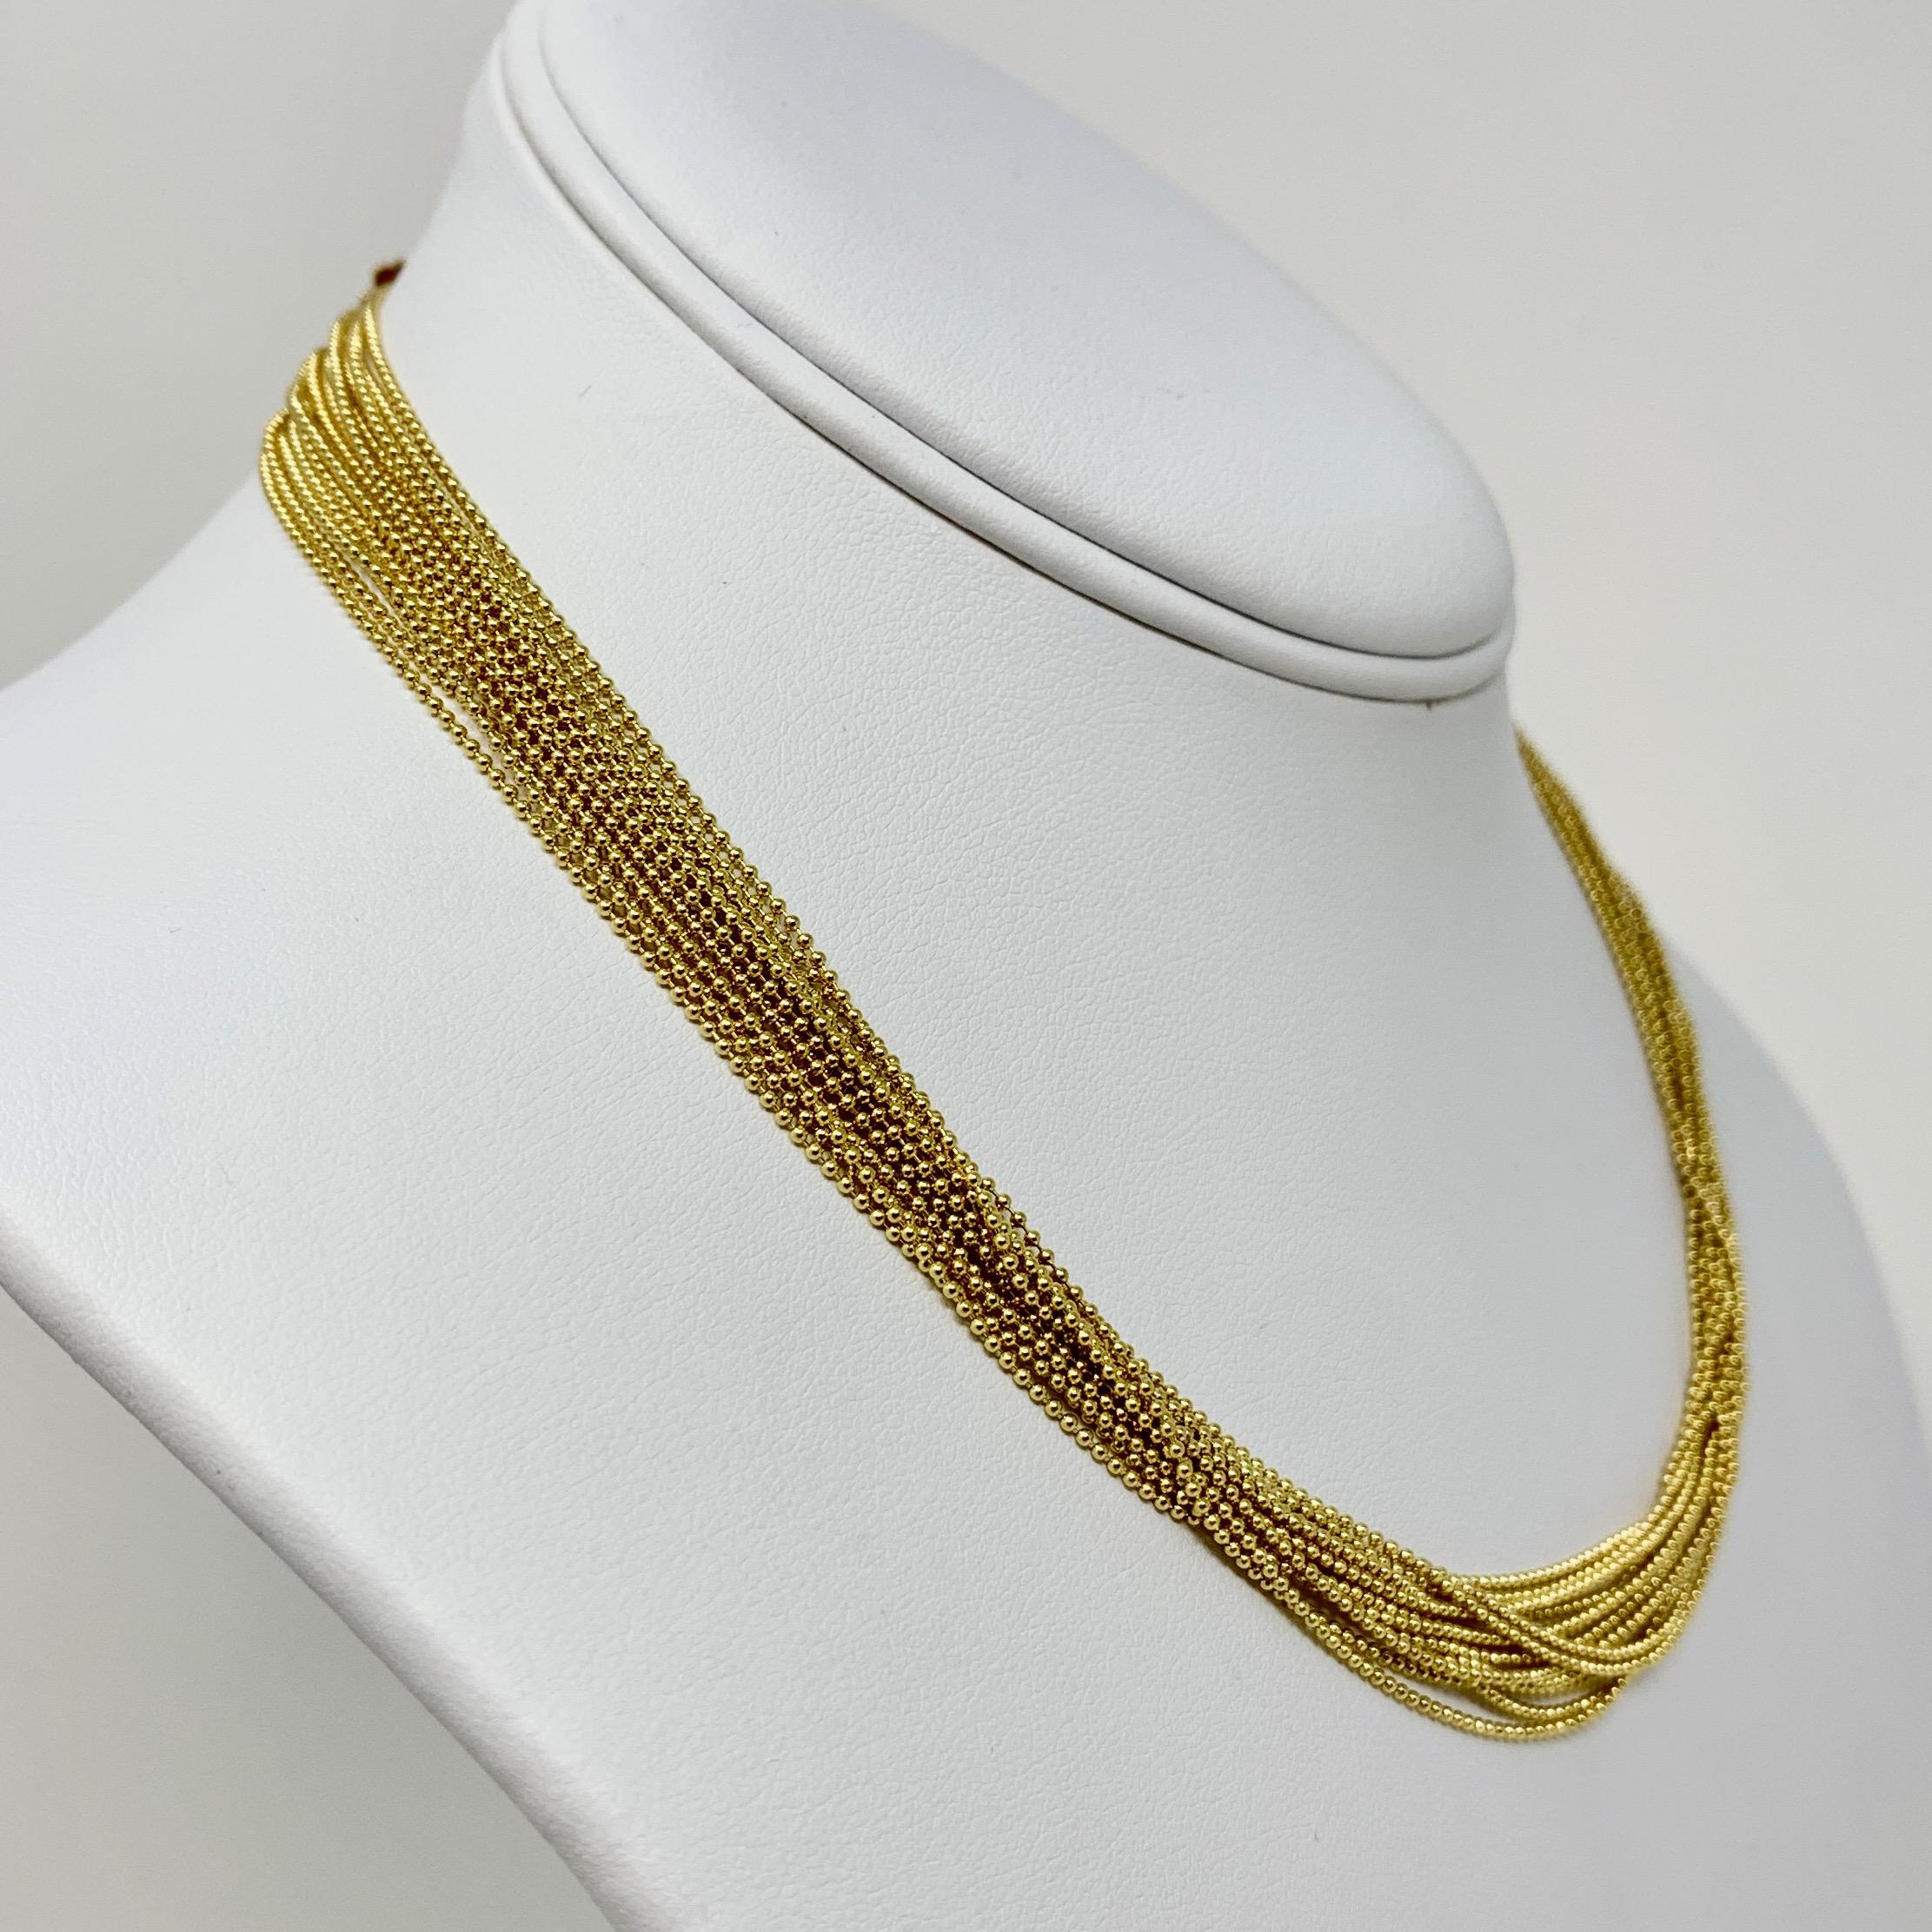 14k Yellow Gold Fifteen Strand Bead Link Chain Necklace 16.25 Inches

Condition:  Excellent (Professionally Cleaned and Polished)
Metal:  14k Gold (Marked, and Professionally Tested)
Weight:  24.5g
Length:  16.25 Inches
Width:  14mm
Closure:  Hook